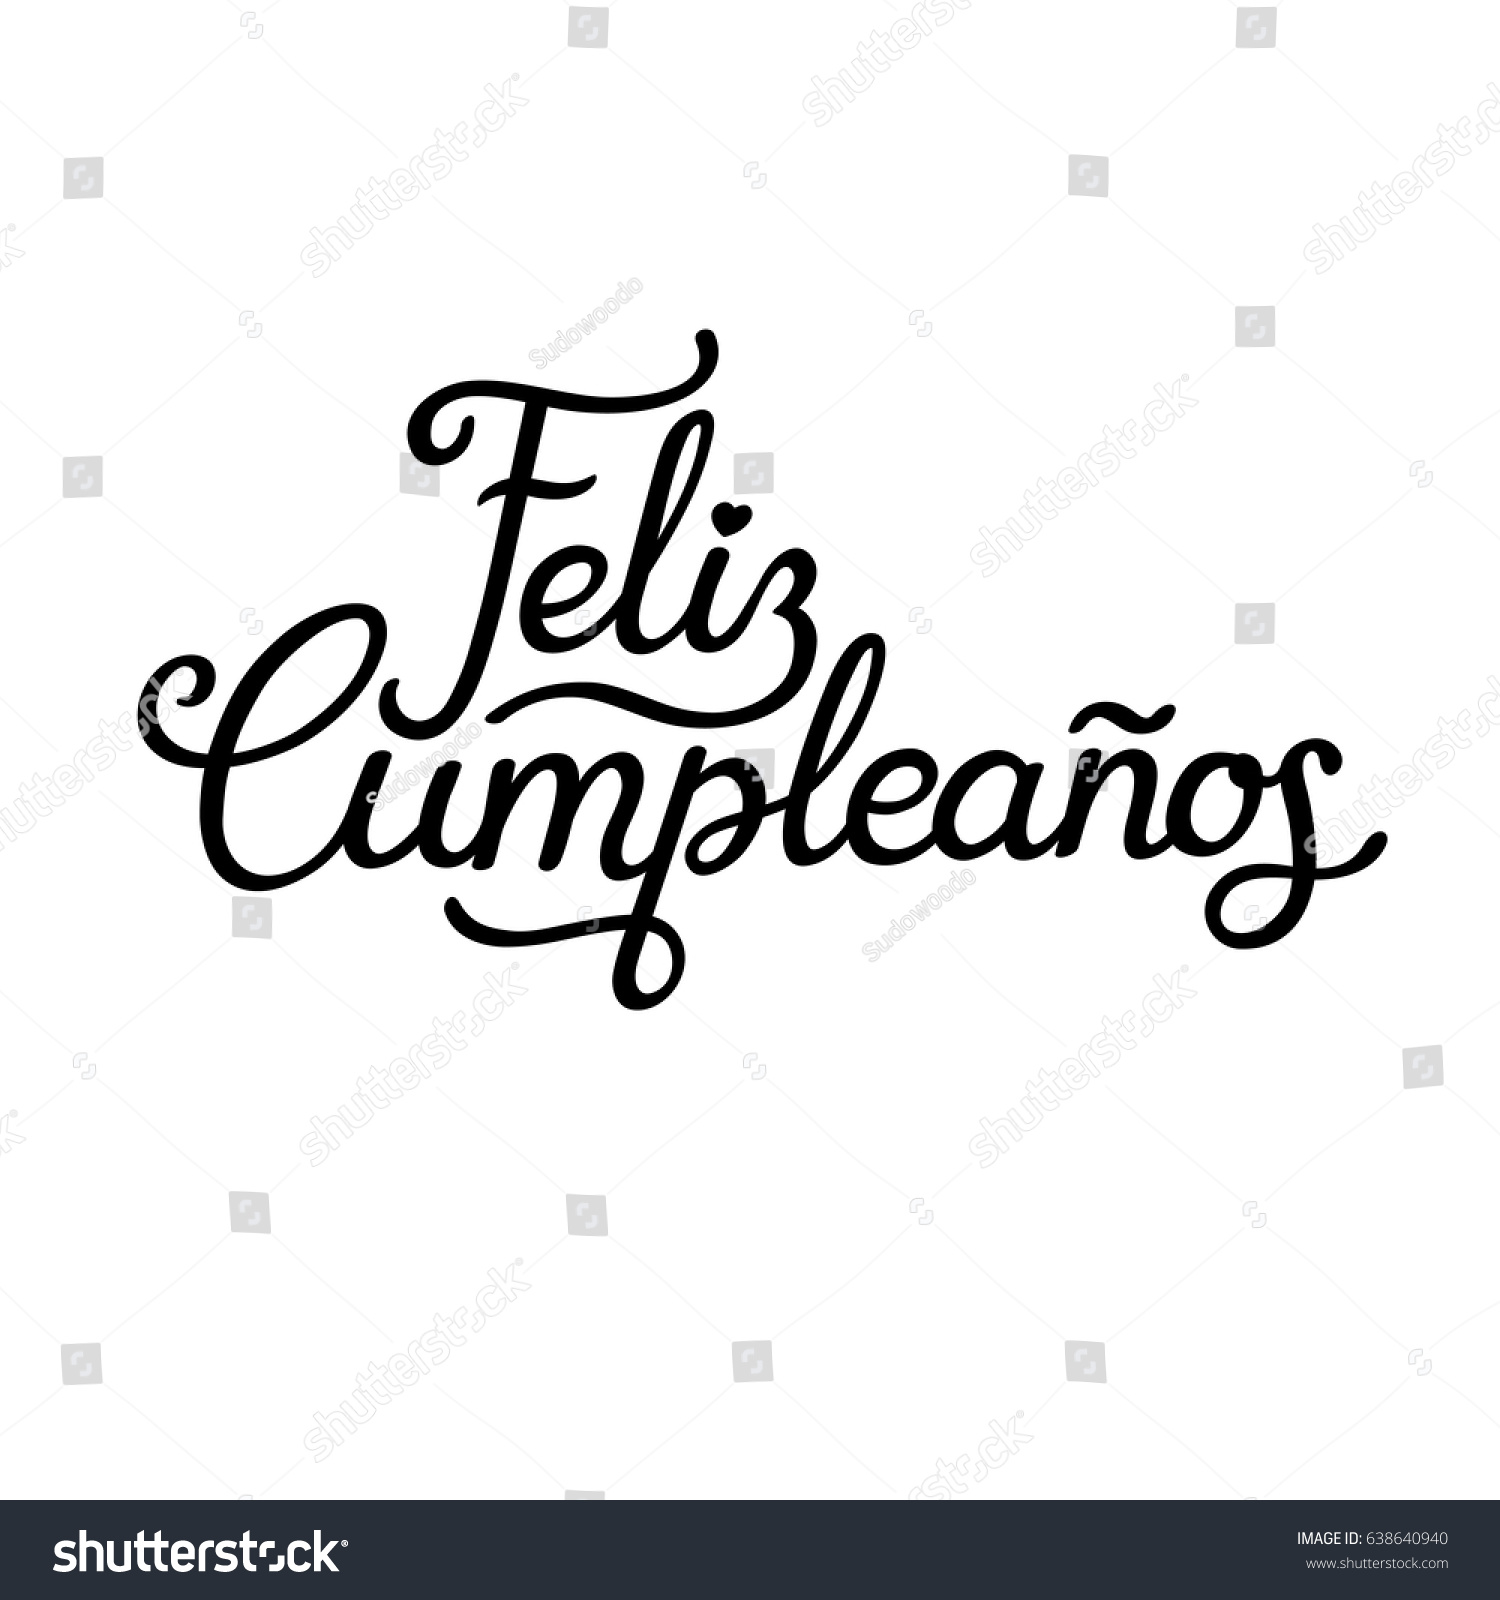 Feliz Cumpleanos Translated Happy Birthday Spanish Stock Vector Royalty Free 638640940 To be a part of your life is a priceless gift too. https www shutterstock com image vector feliz cumpleanos translated happy birthday spanish 638640940